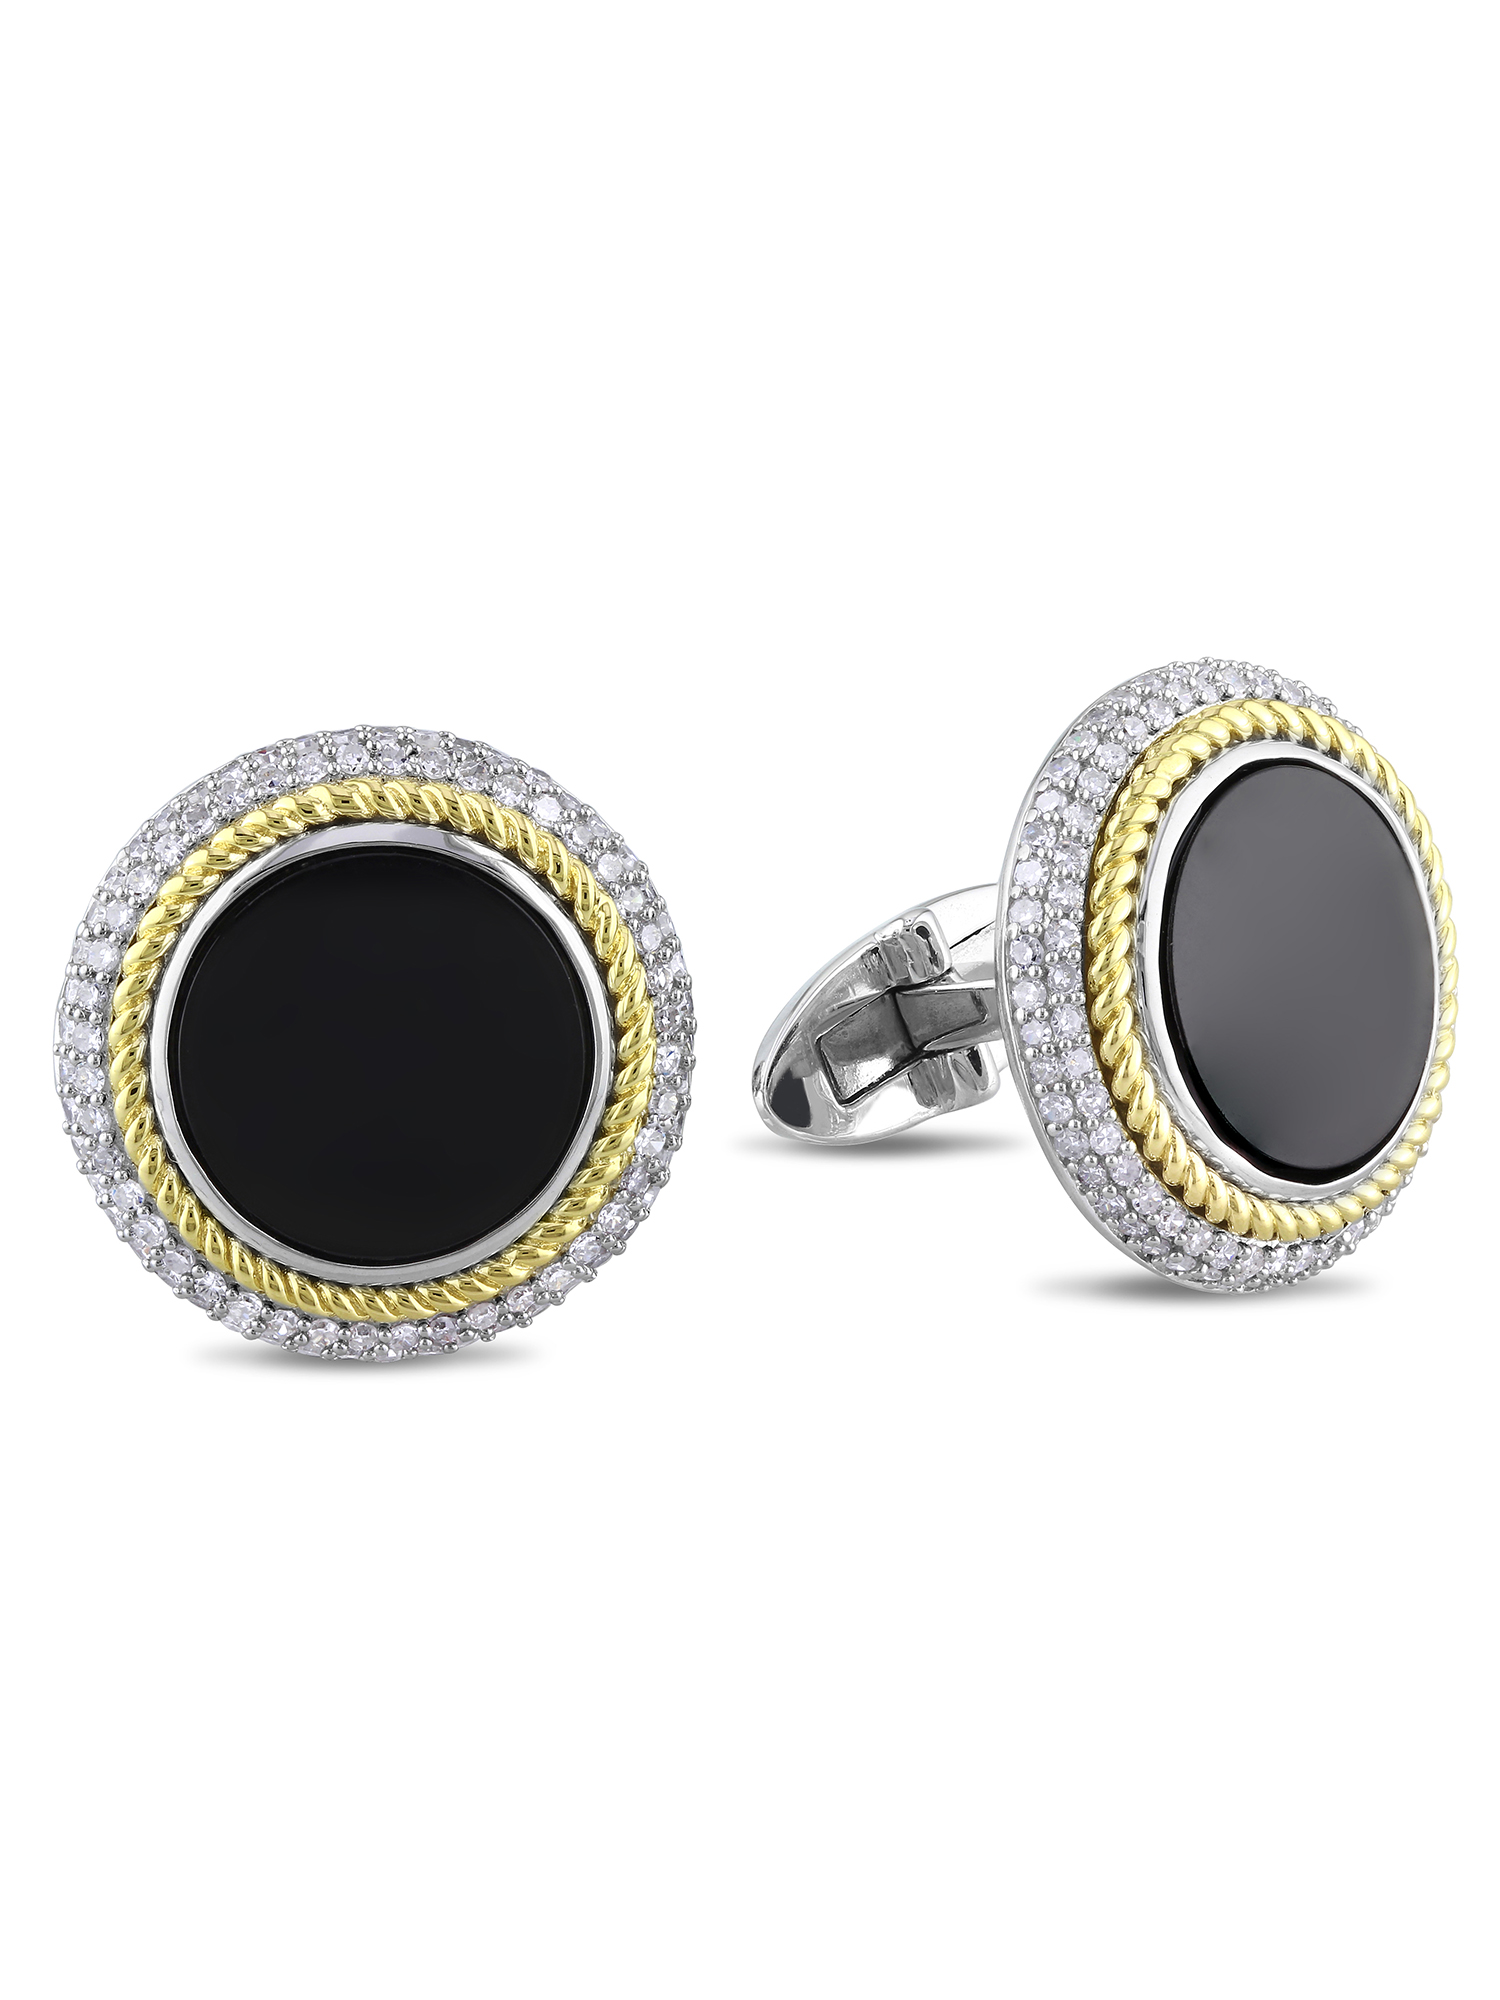 Miabella 8 Carat T.G.W. Black Onyx and 7/8 Carat T.W. Diamond 2-Tone 14k Yellow Gold and Sterling Silver Disc Cufflinks - image 1 of 4